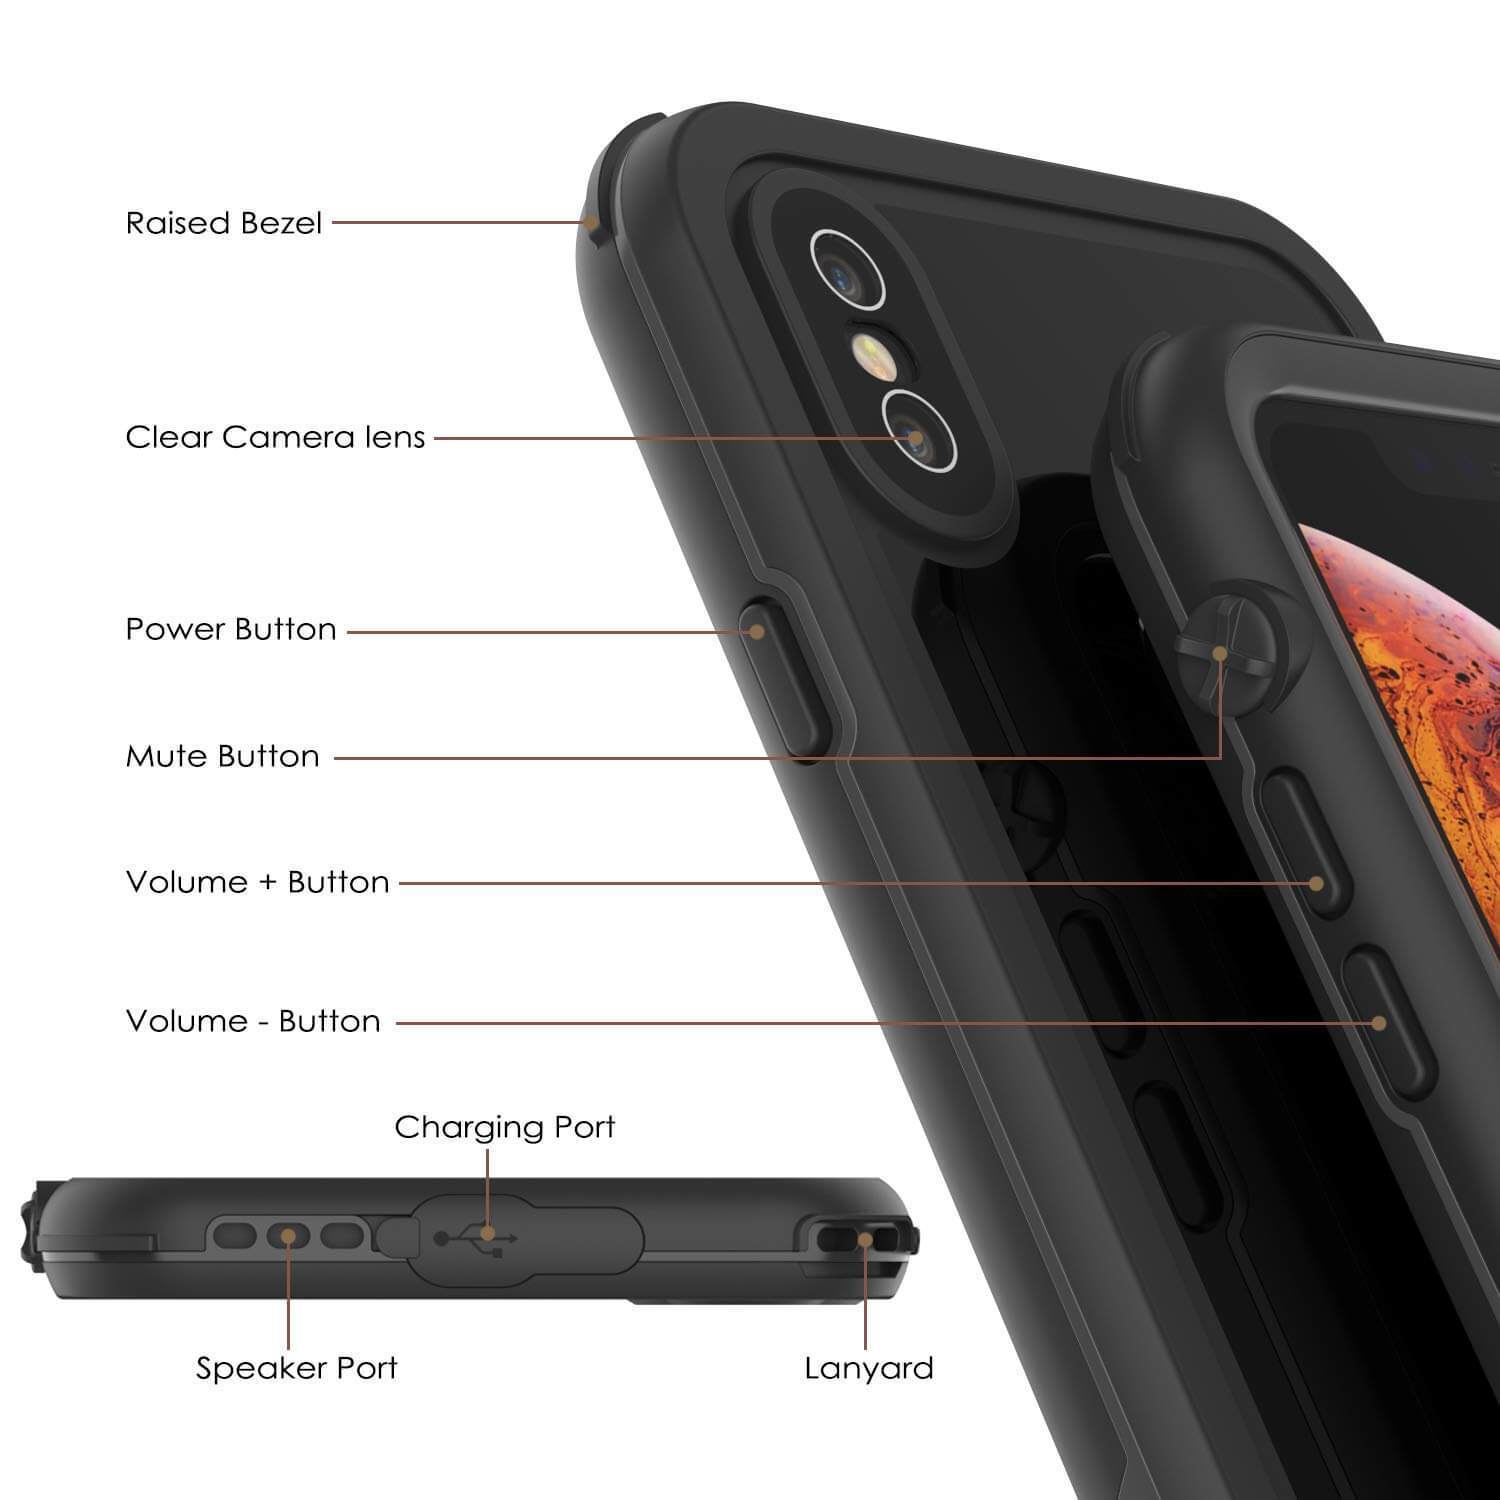 iPhone XS Max Waterproof IP68 Case, Punkcase [Shiny Black] [Rapture Series]  W/Built in Screen Protector